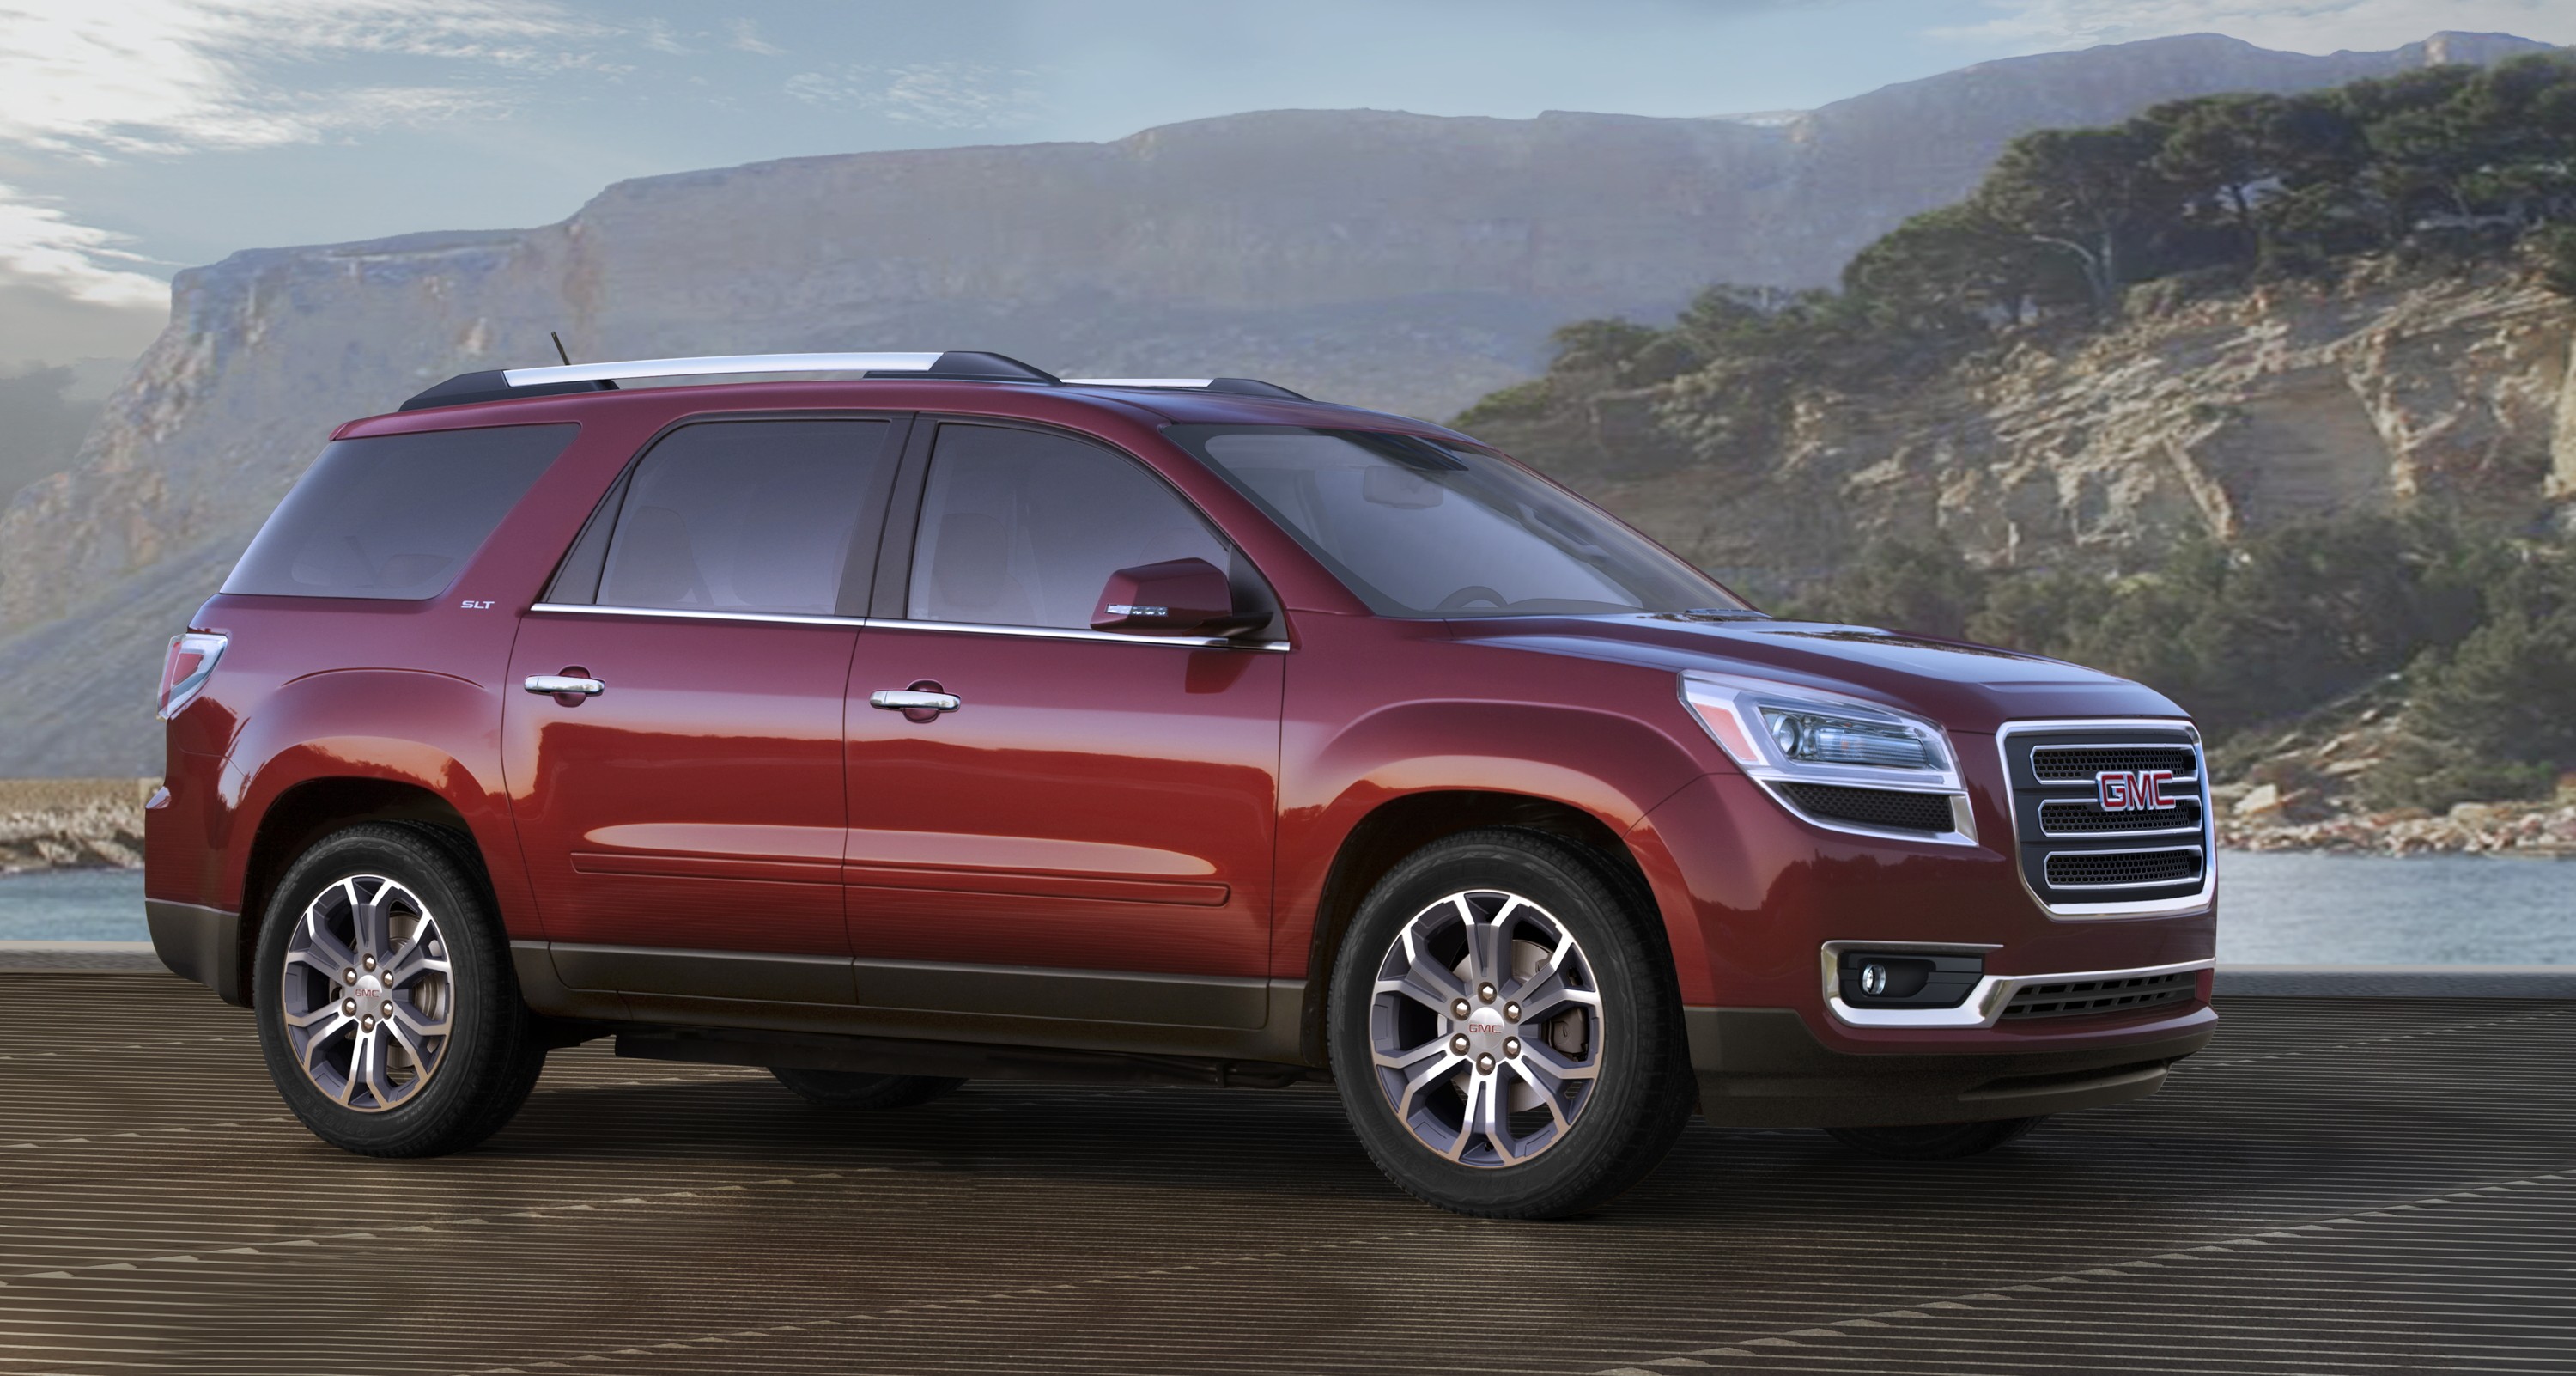 2016 GMC Acadia Introduced With OnStar 4G LTE - autoevolution